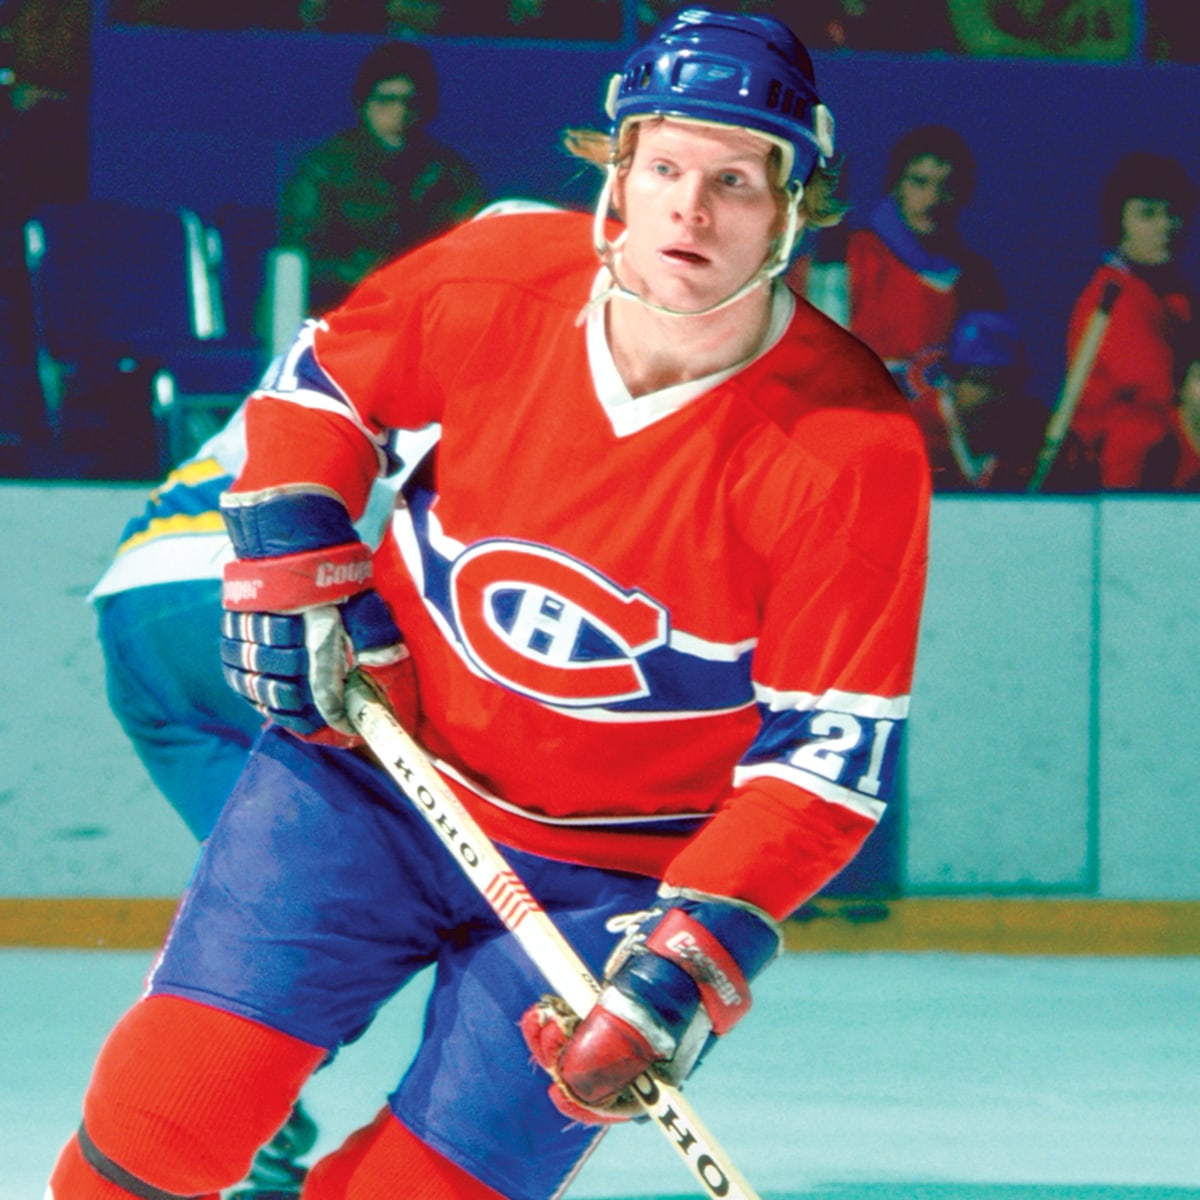 Canadian ice hockey player Doug Jarvis of the Montreal Canadiens